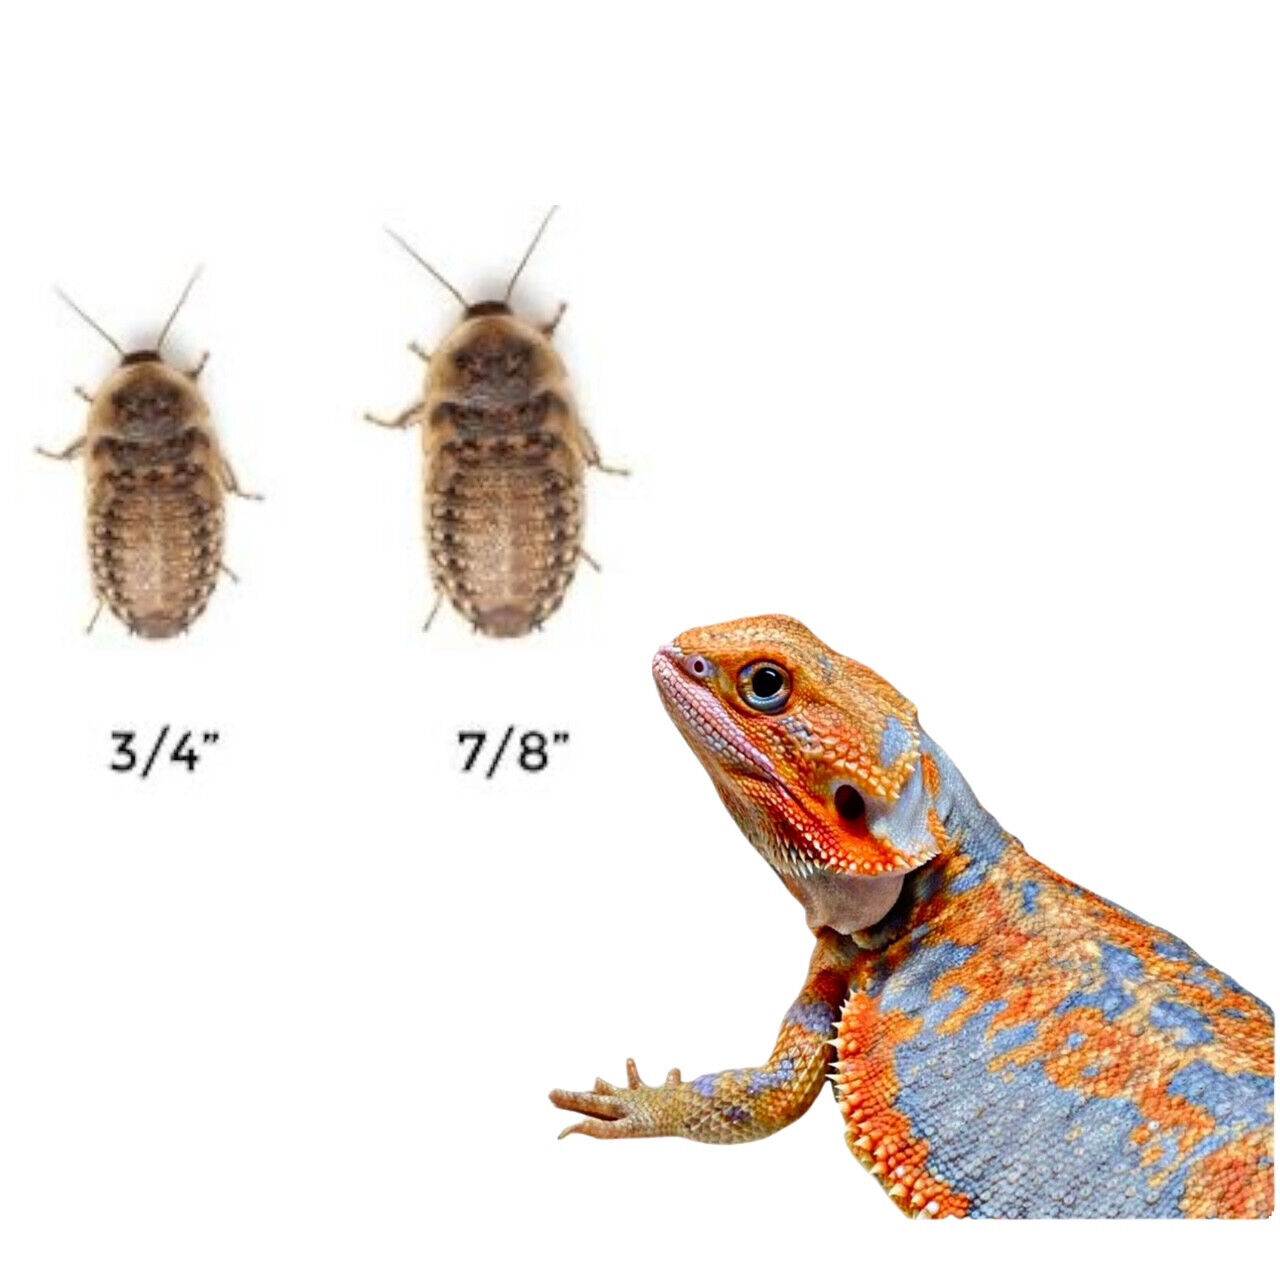 Large Dubia Roaches 3/4”-7/8” 50 Counts - 1000 Counts  + 10% EXTRA.